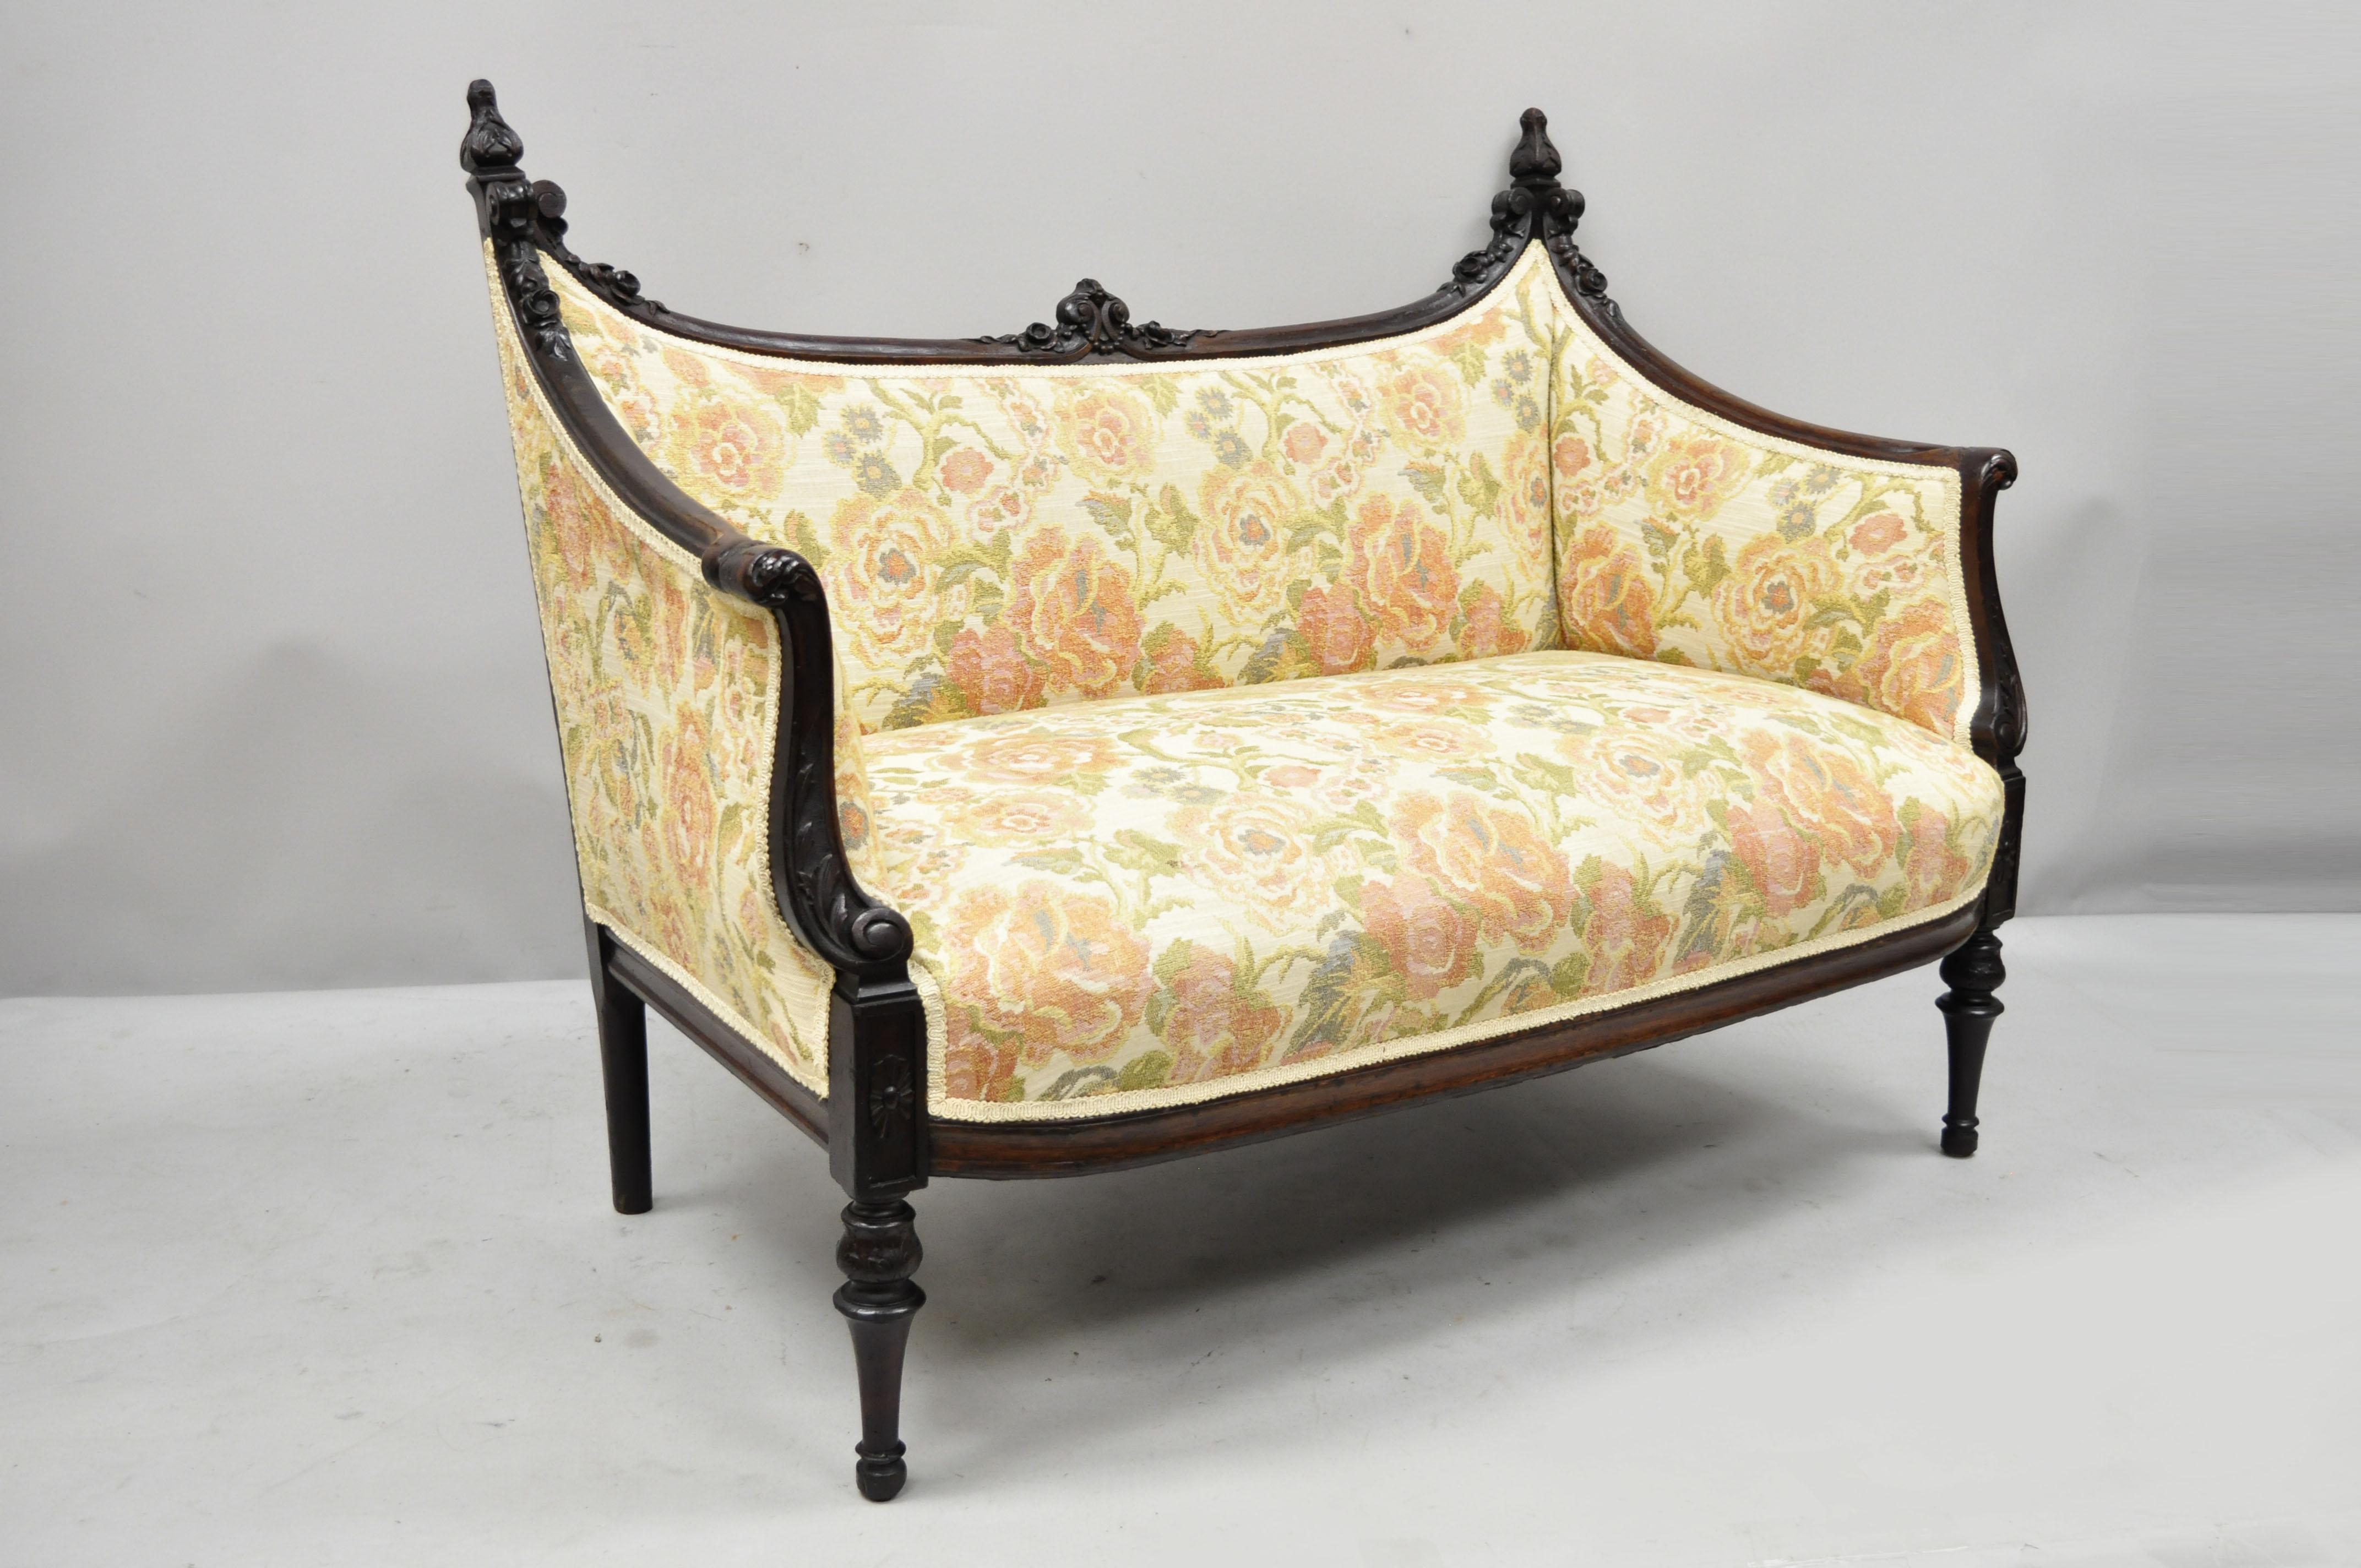 Small Antique French Louis XVI style carved mahogany Victorian settee. Item features unique shapely frame, floral carved details, acanthus carved finials, tapered legs, very nice antique item, circa 1900. Measurements: 34